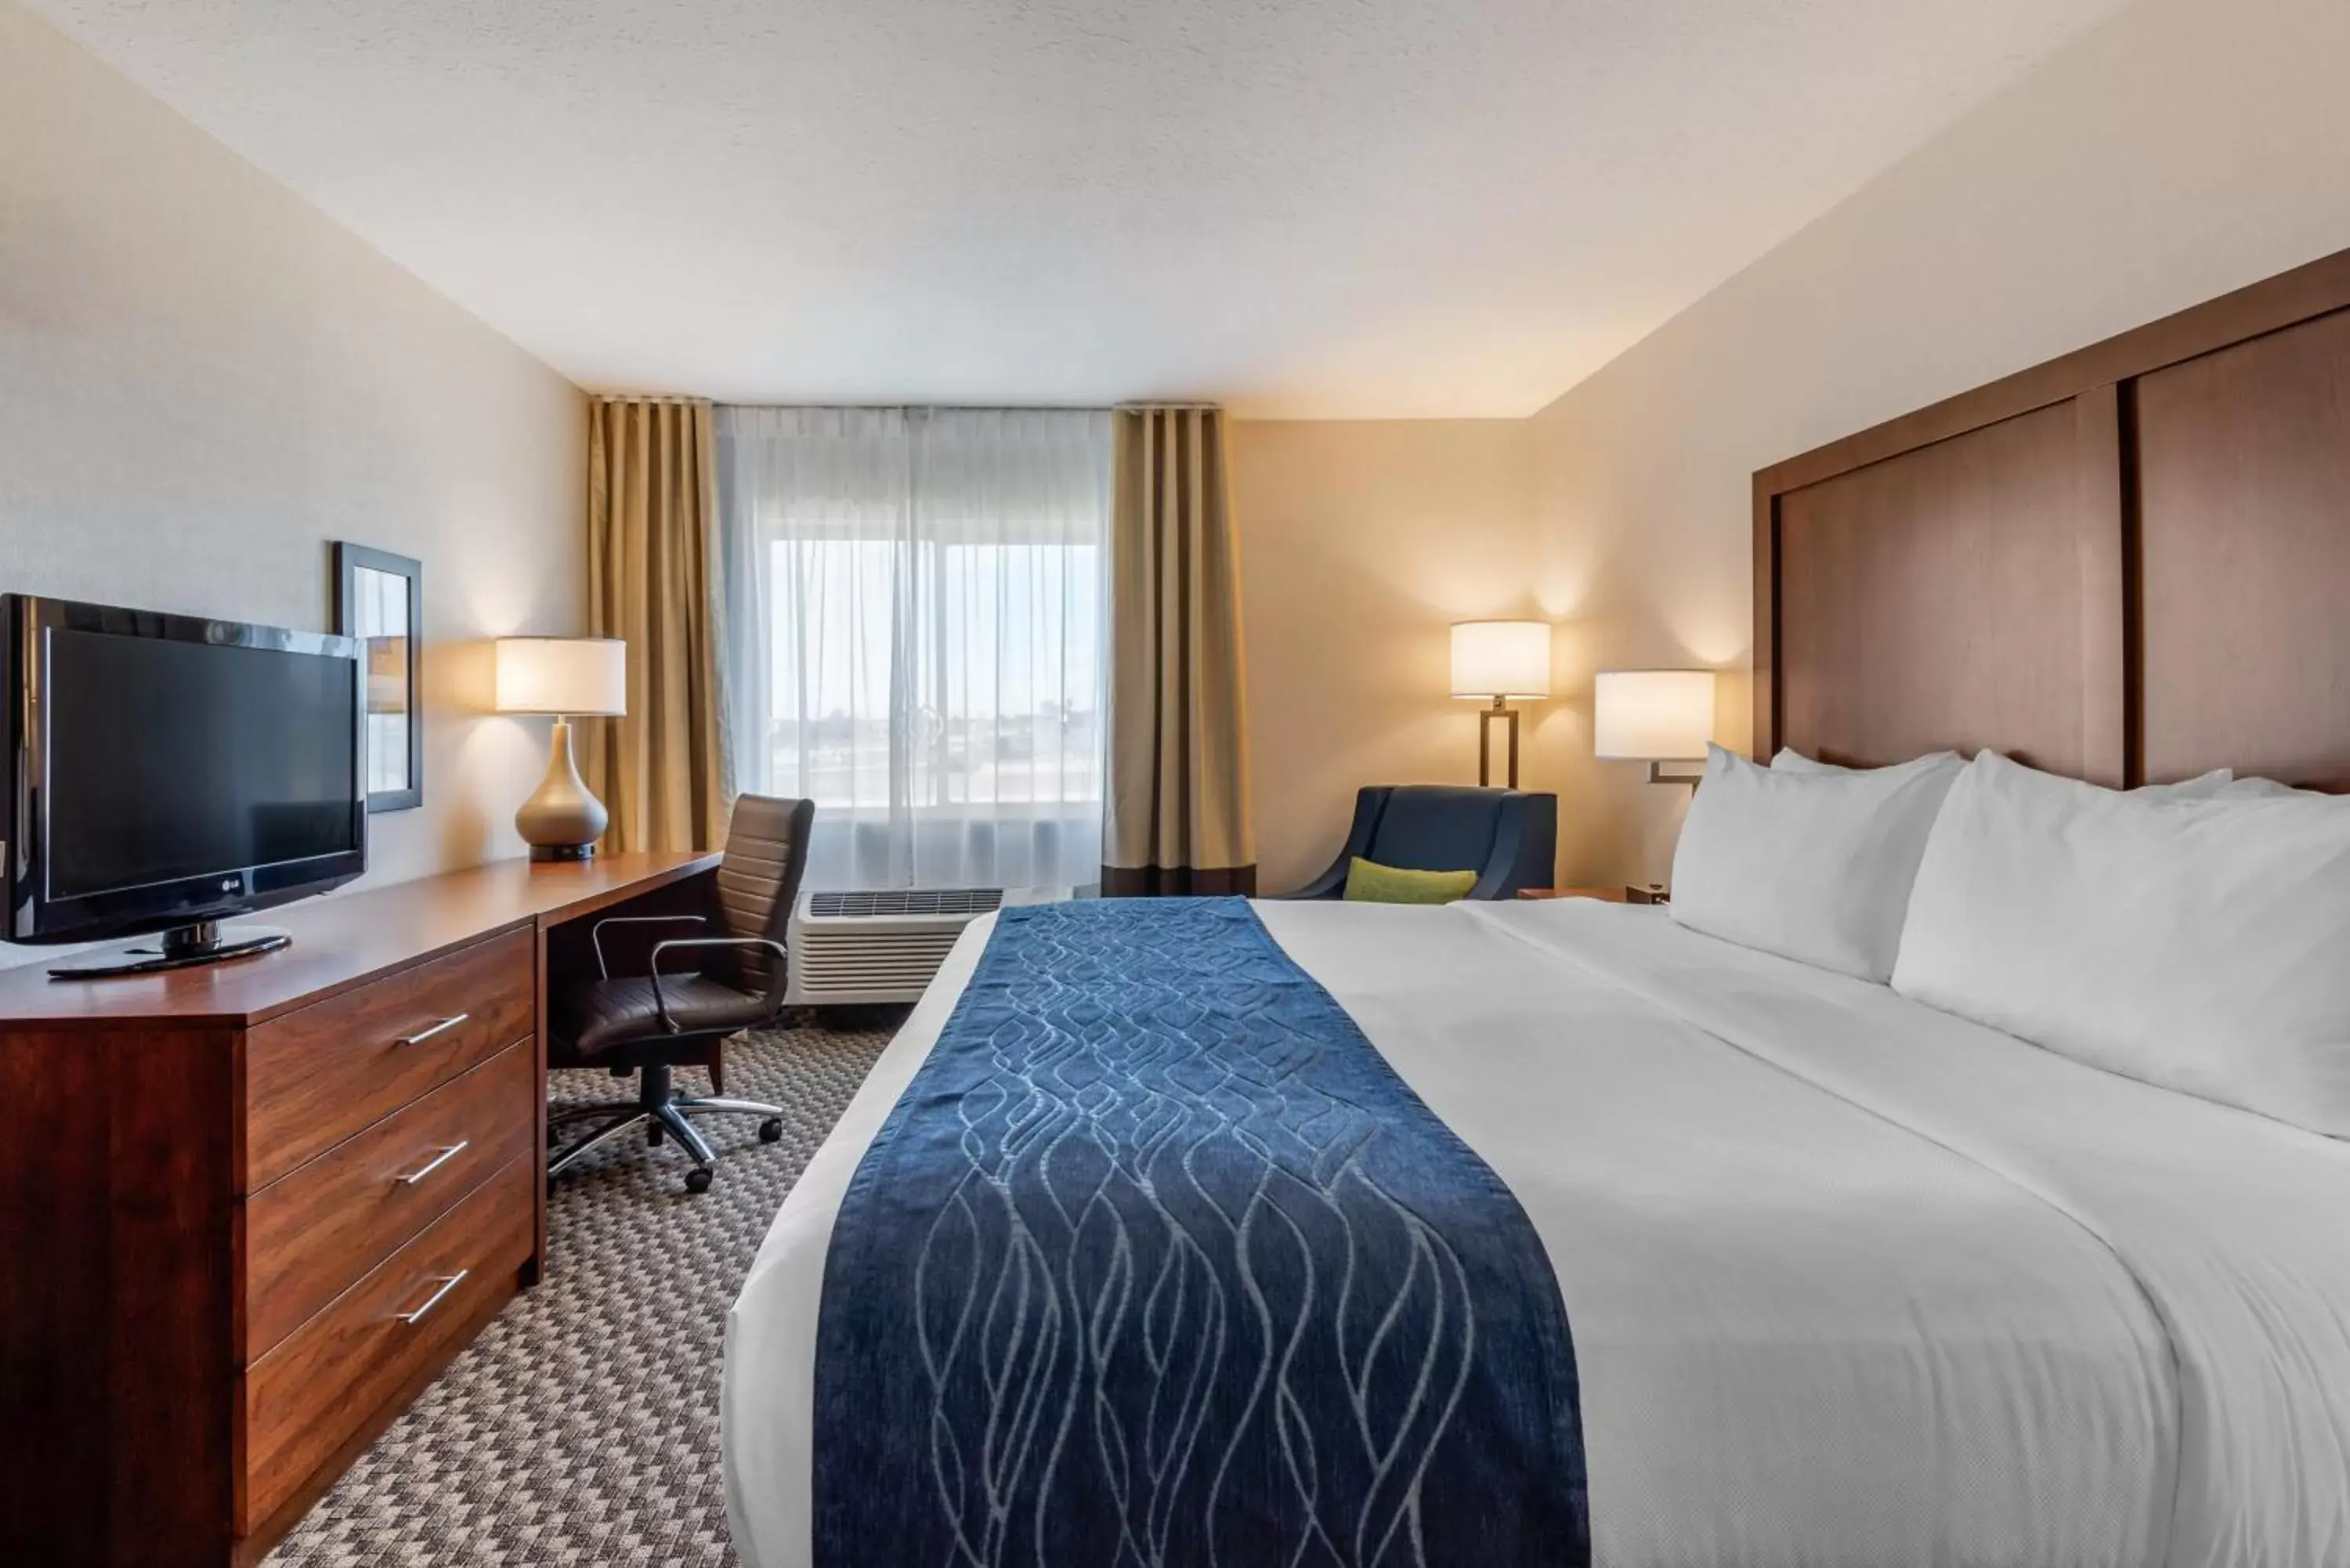 King Room - Non-Smoking in Comfort Inn & Suites near Route 66 Award Winning Gold Hotel 2021